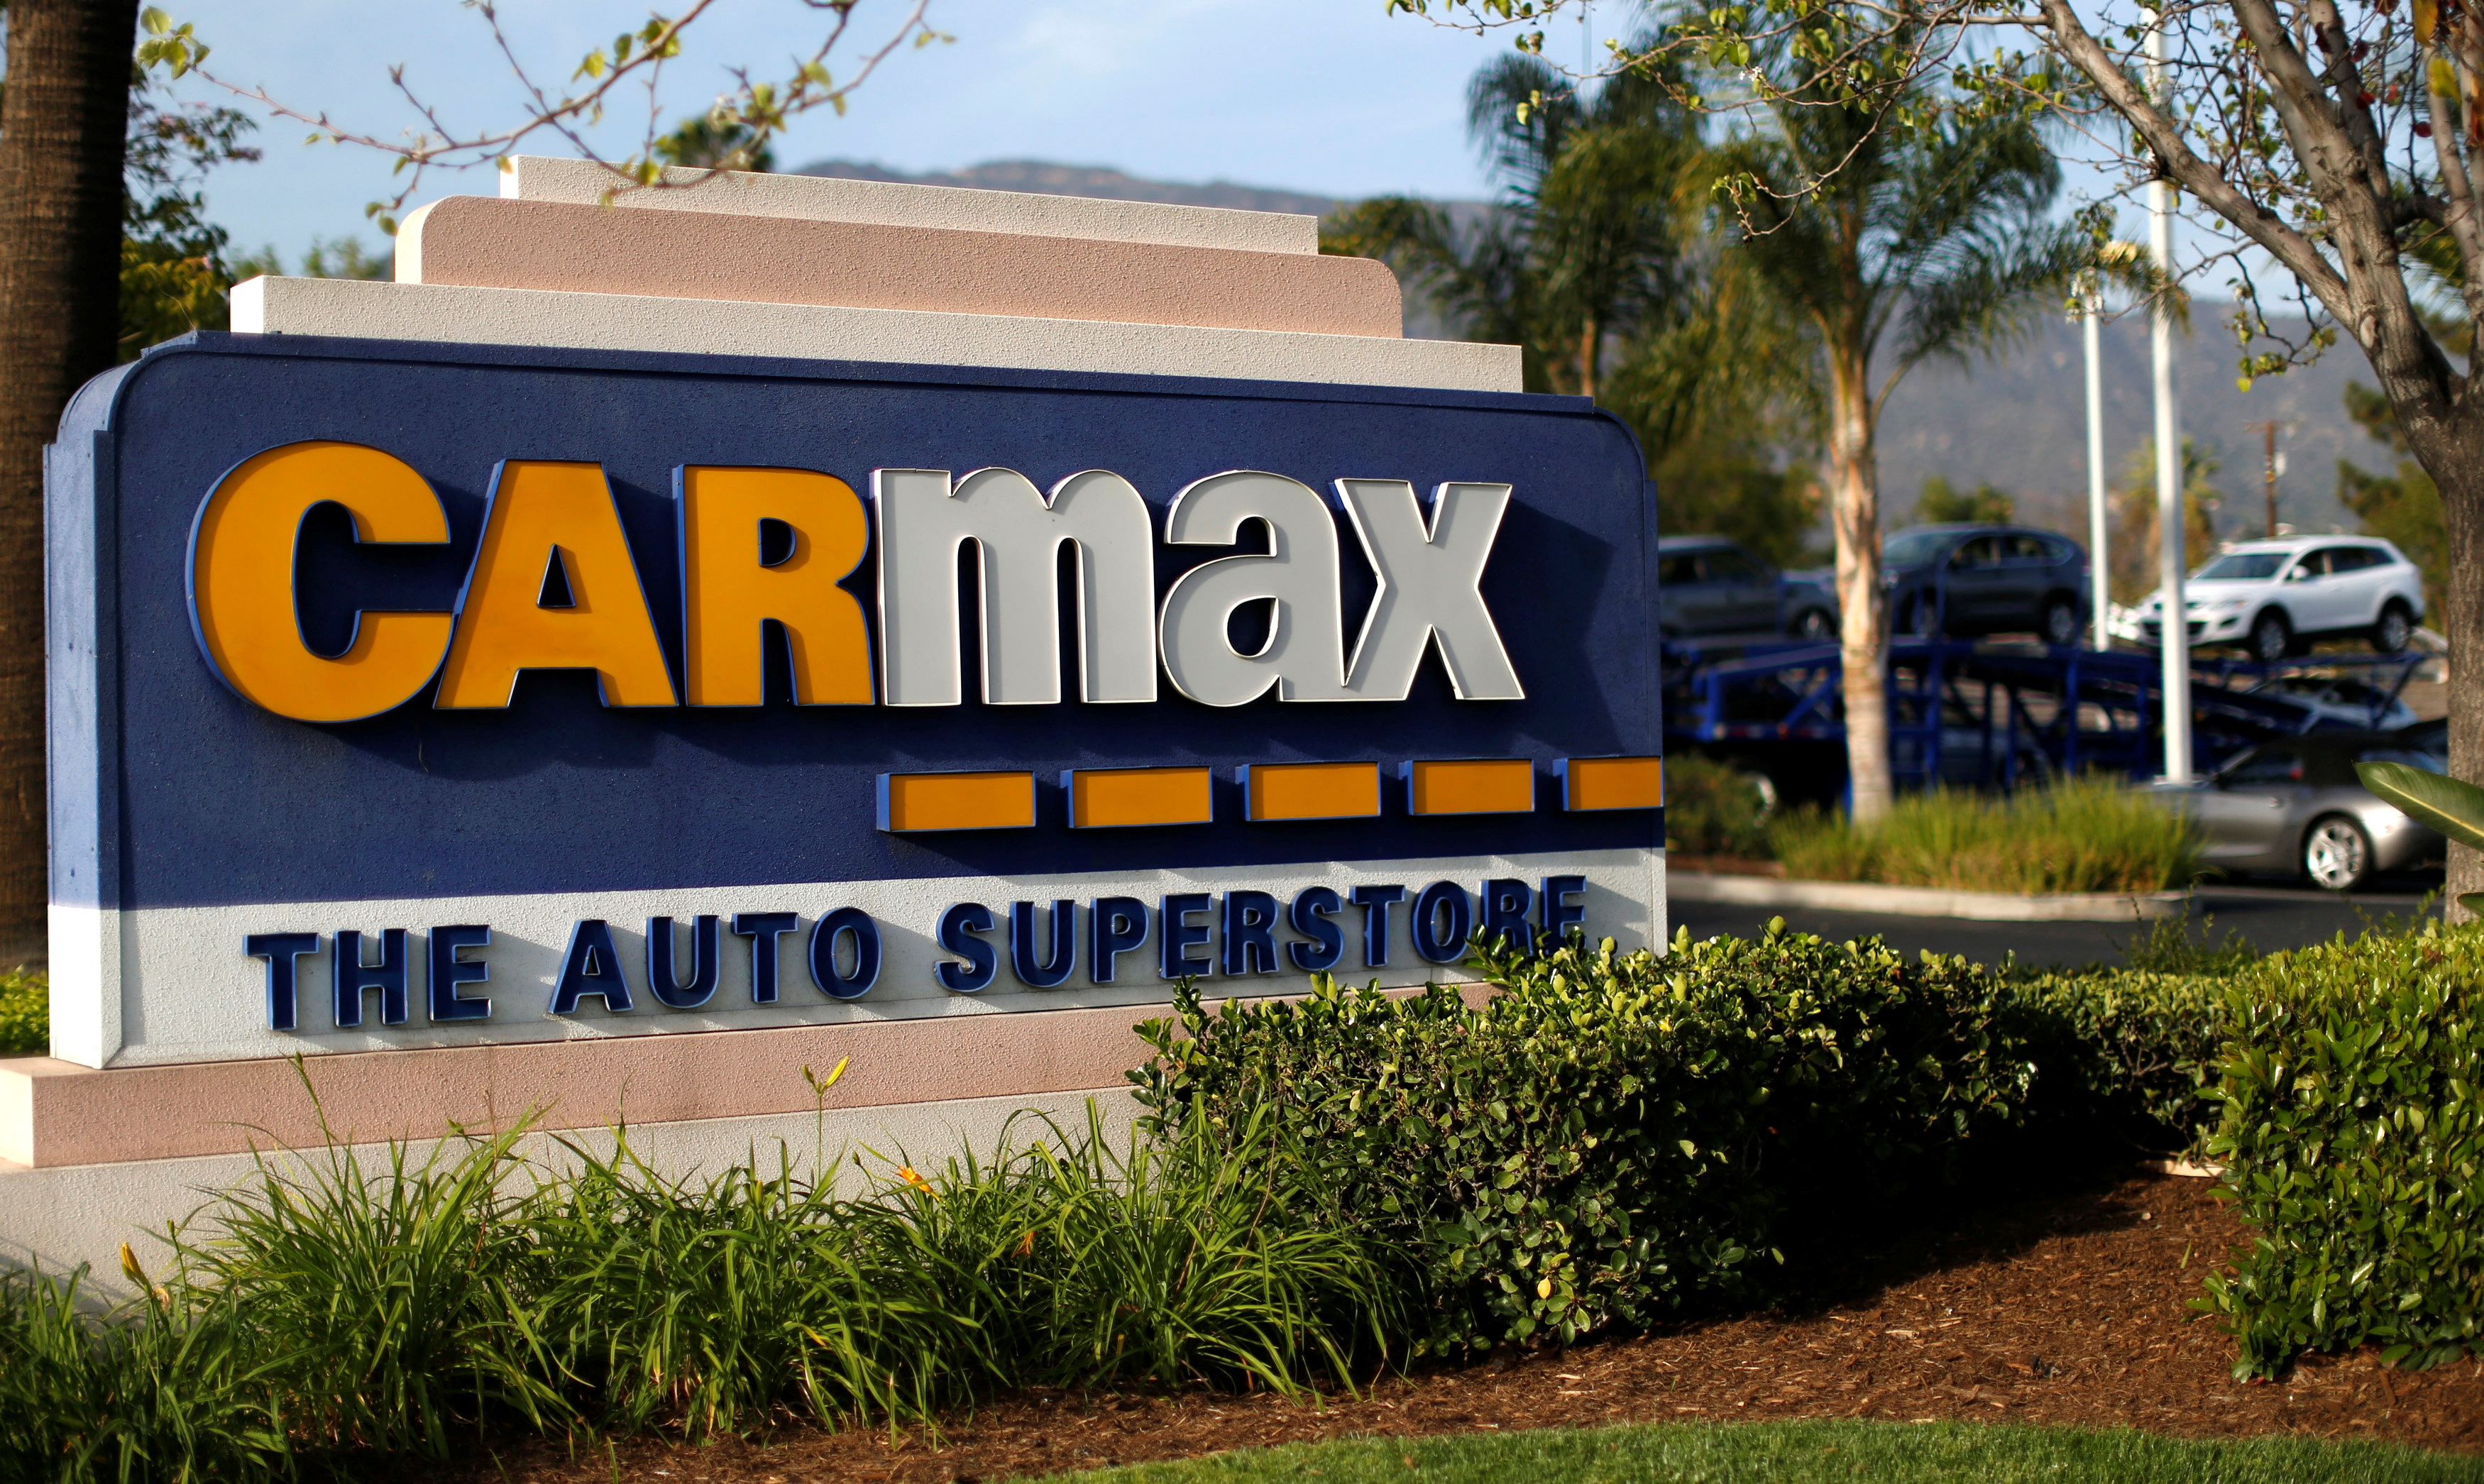 The sign of a CarMax dealership is pictured in Duarte